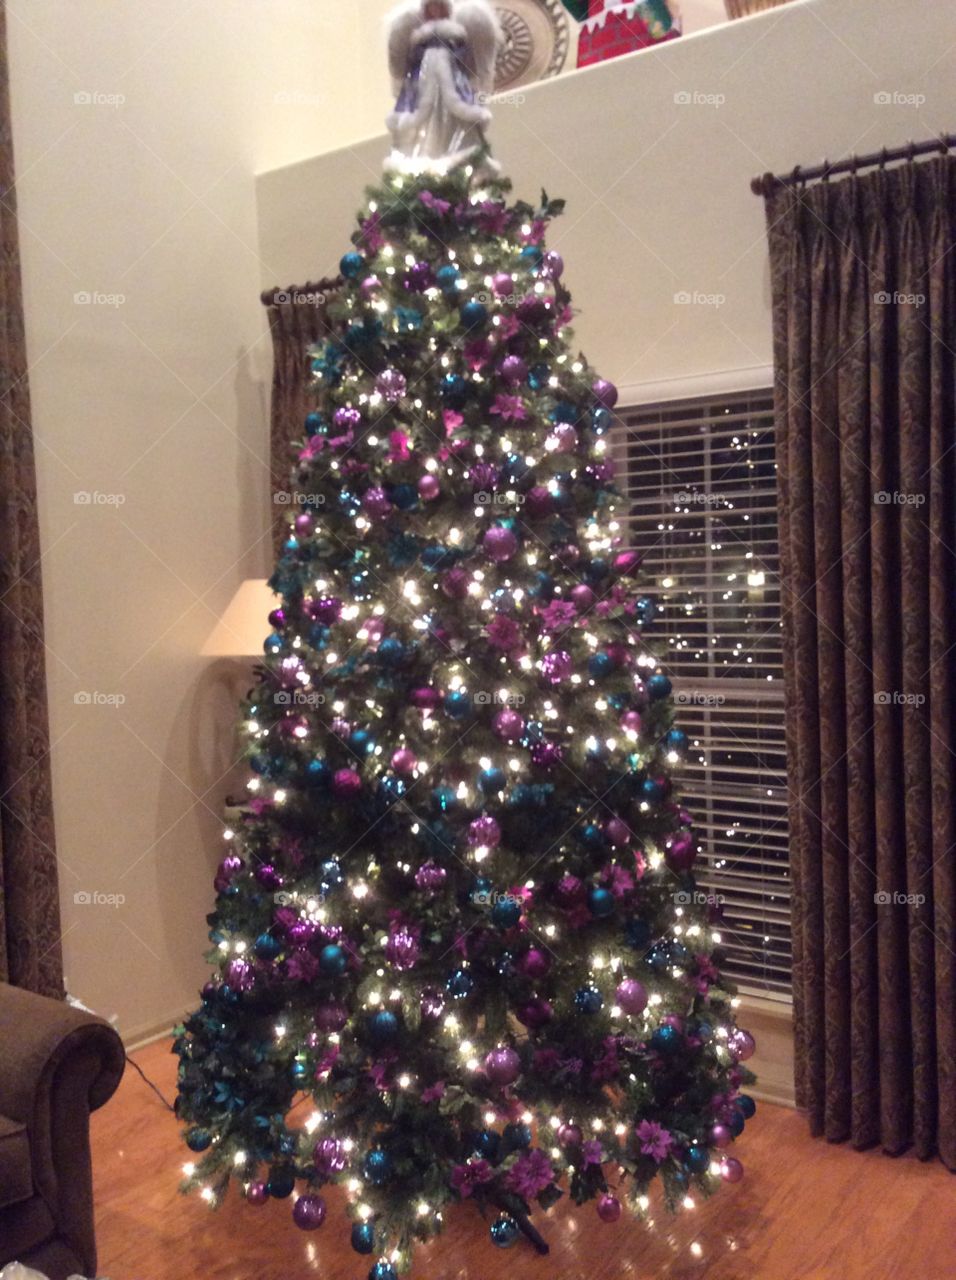 9 Foot Christmas Tree decorated with Teal and Purple Ornaments and Garland